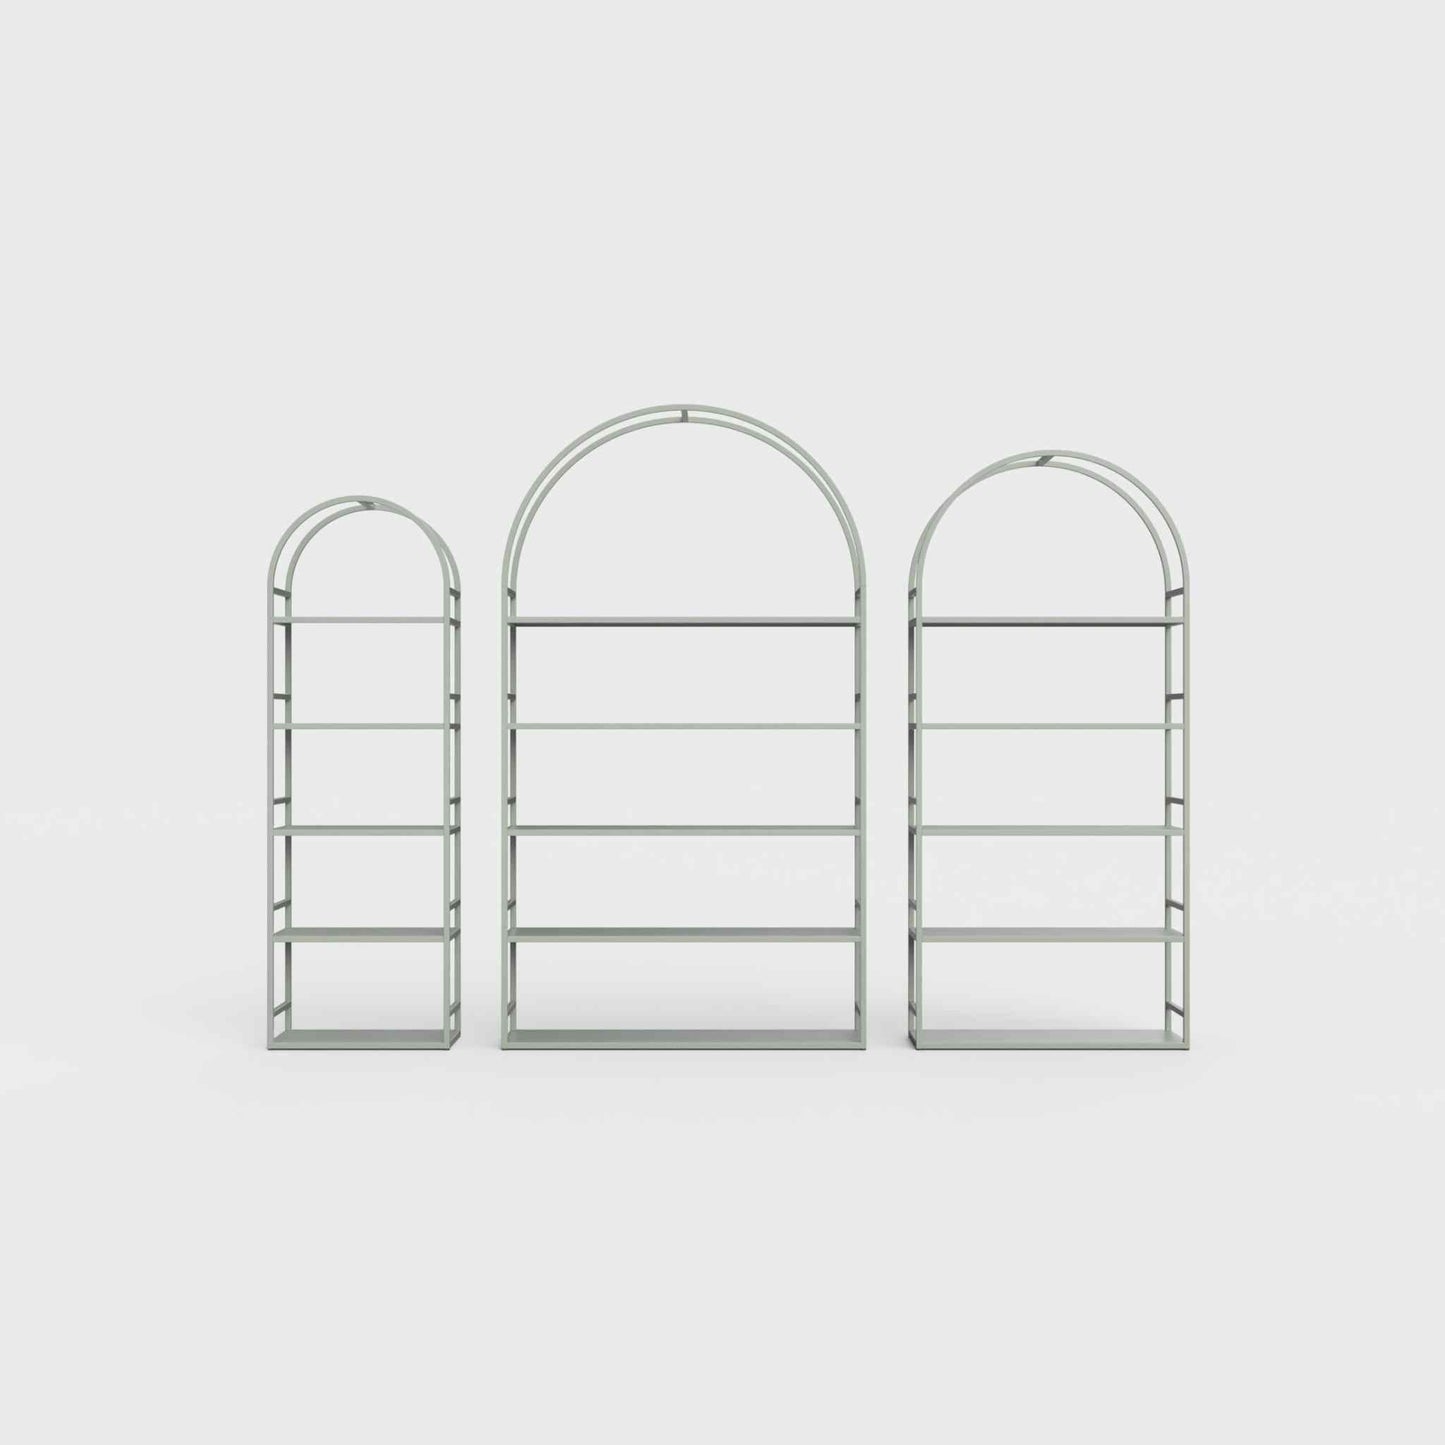 Arched bookcase Arkada, available in Switzerland through ÉTAUDORÉ, made from highest quality powdered coated steel in dark matcha green color